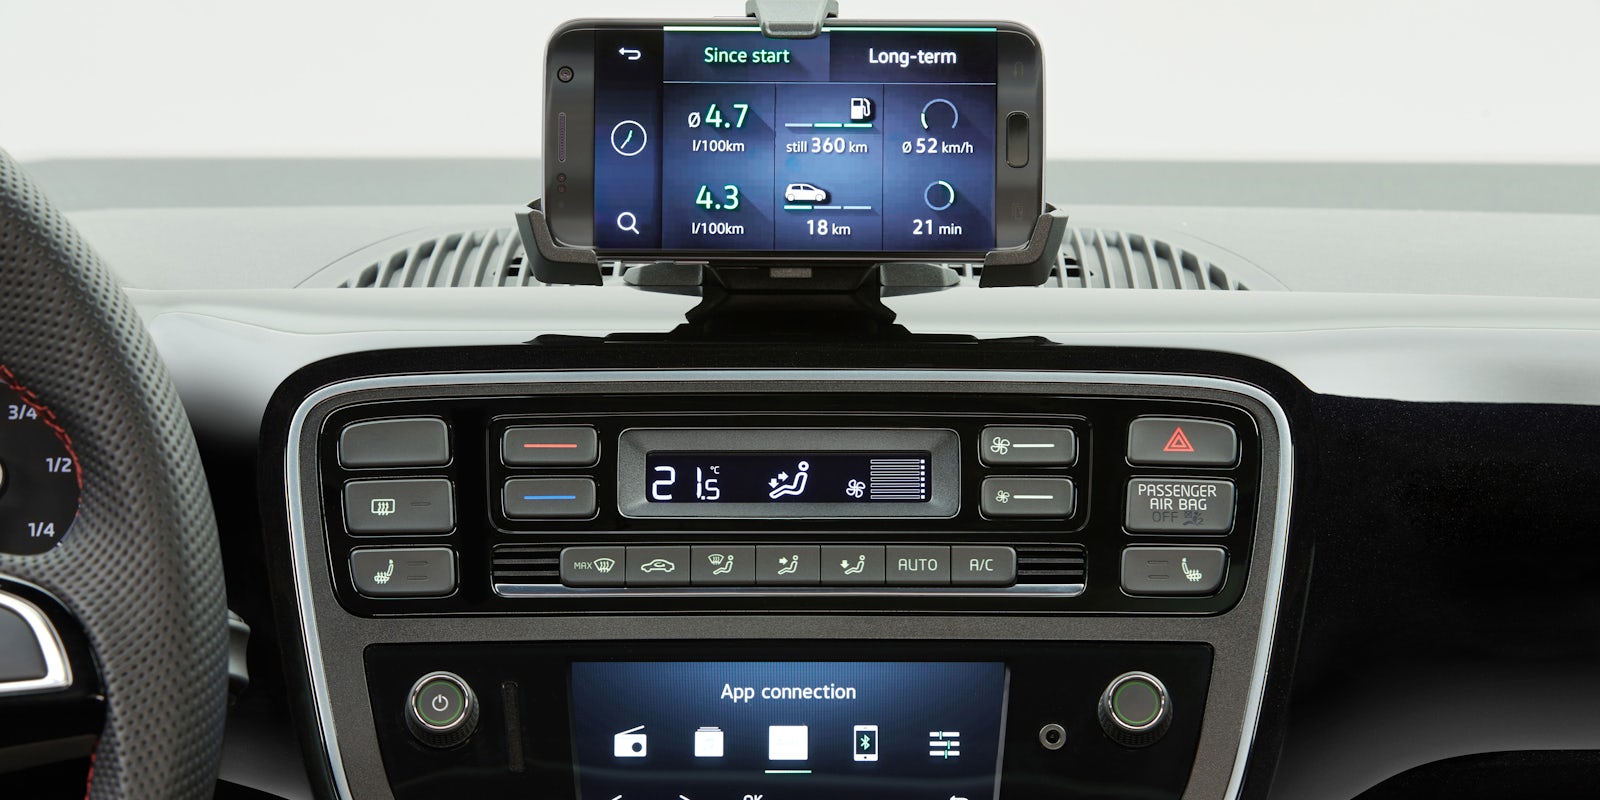 The dash isn't quite as funky as a VW Up's, but it's all very easy to use